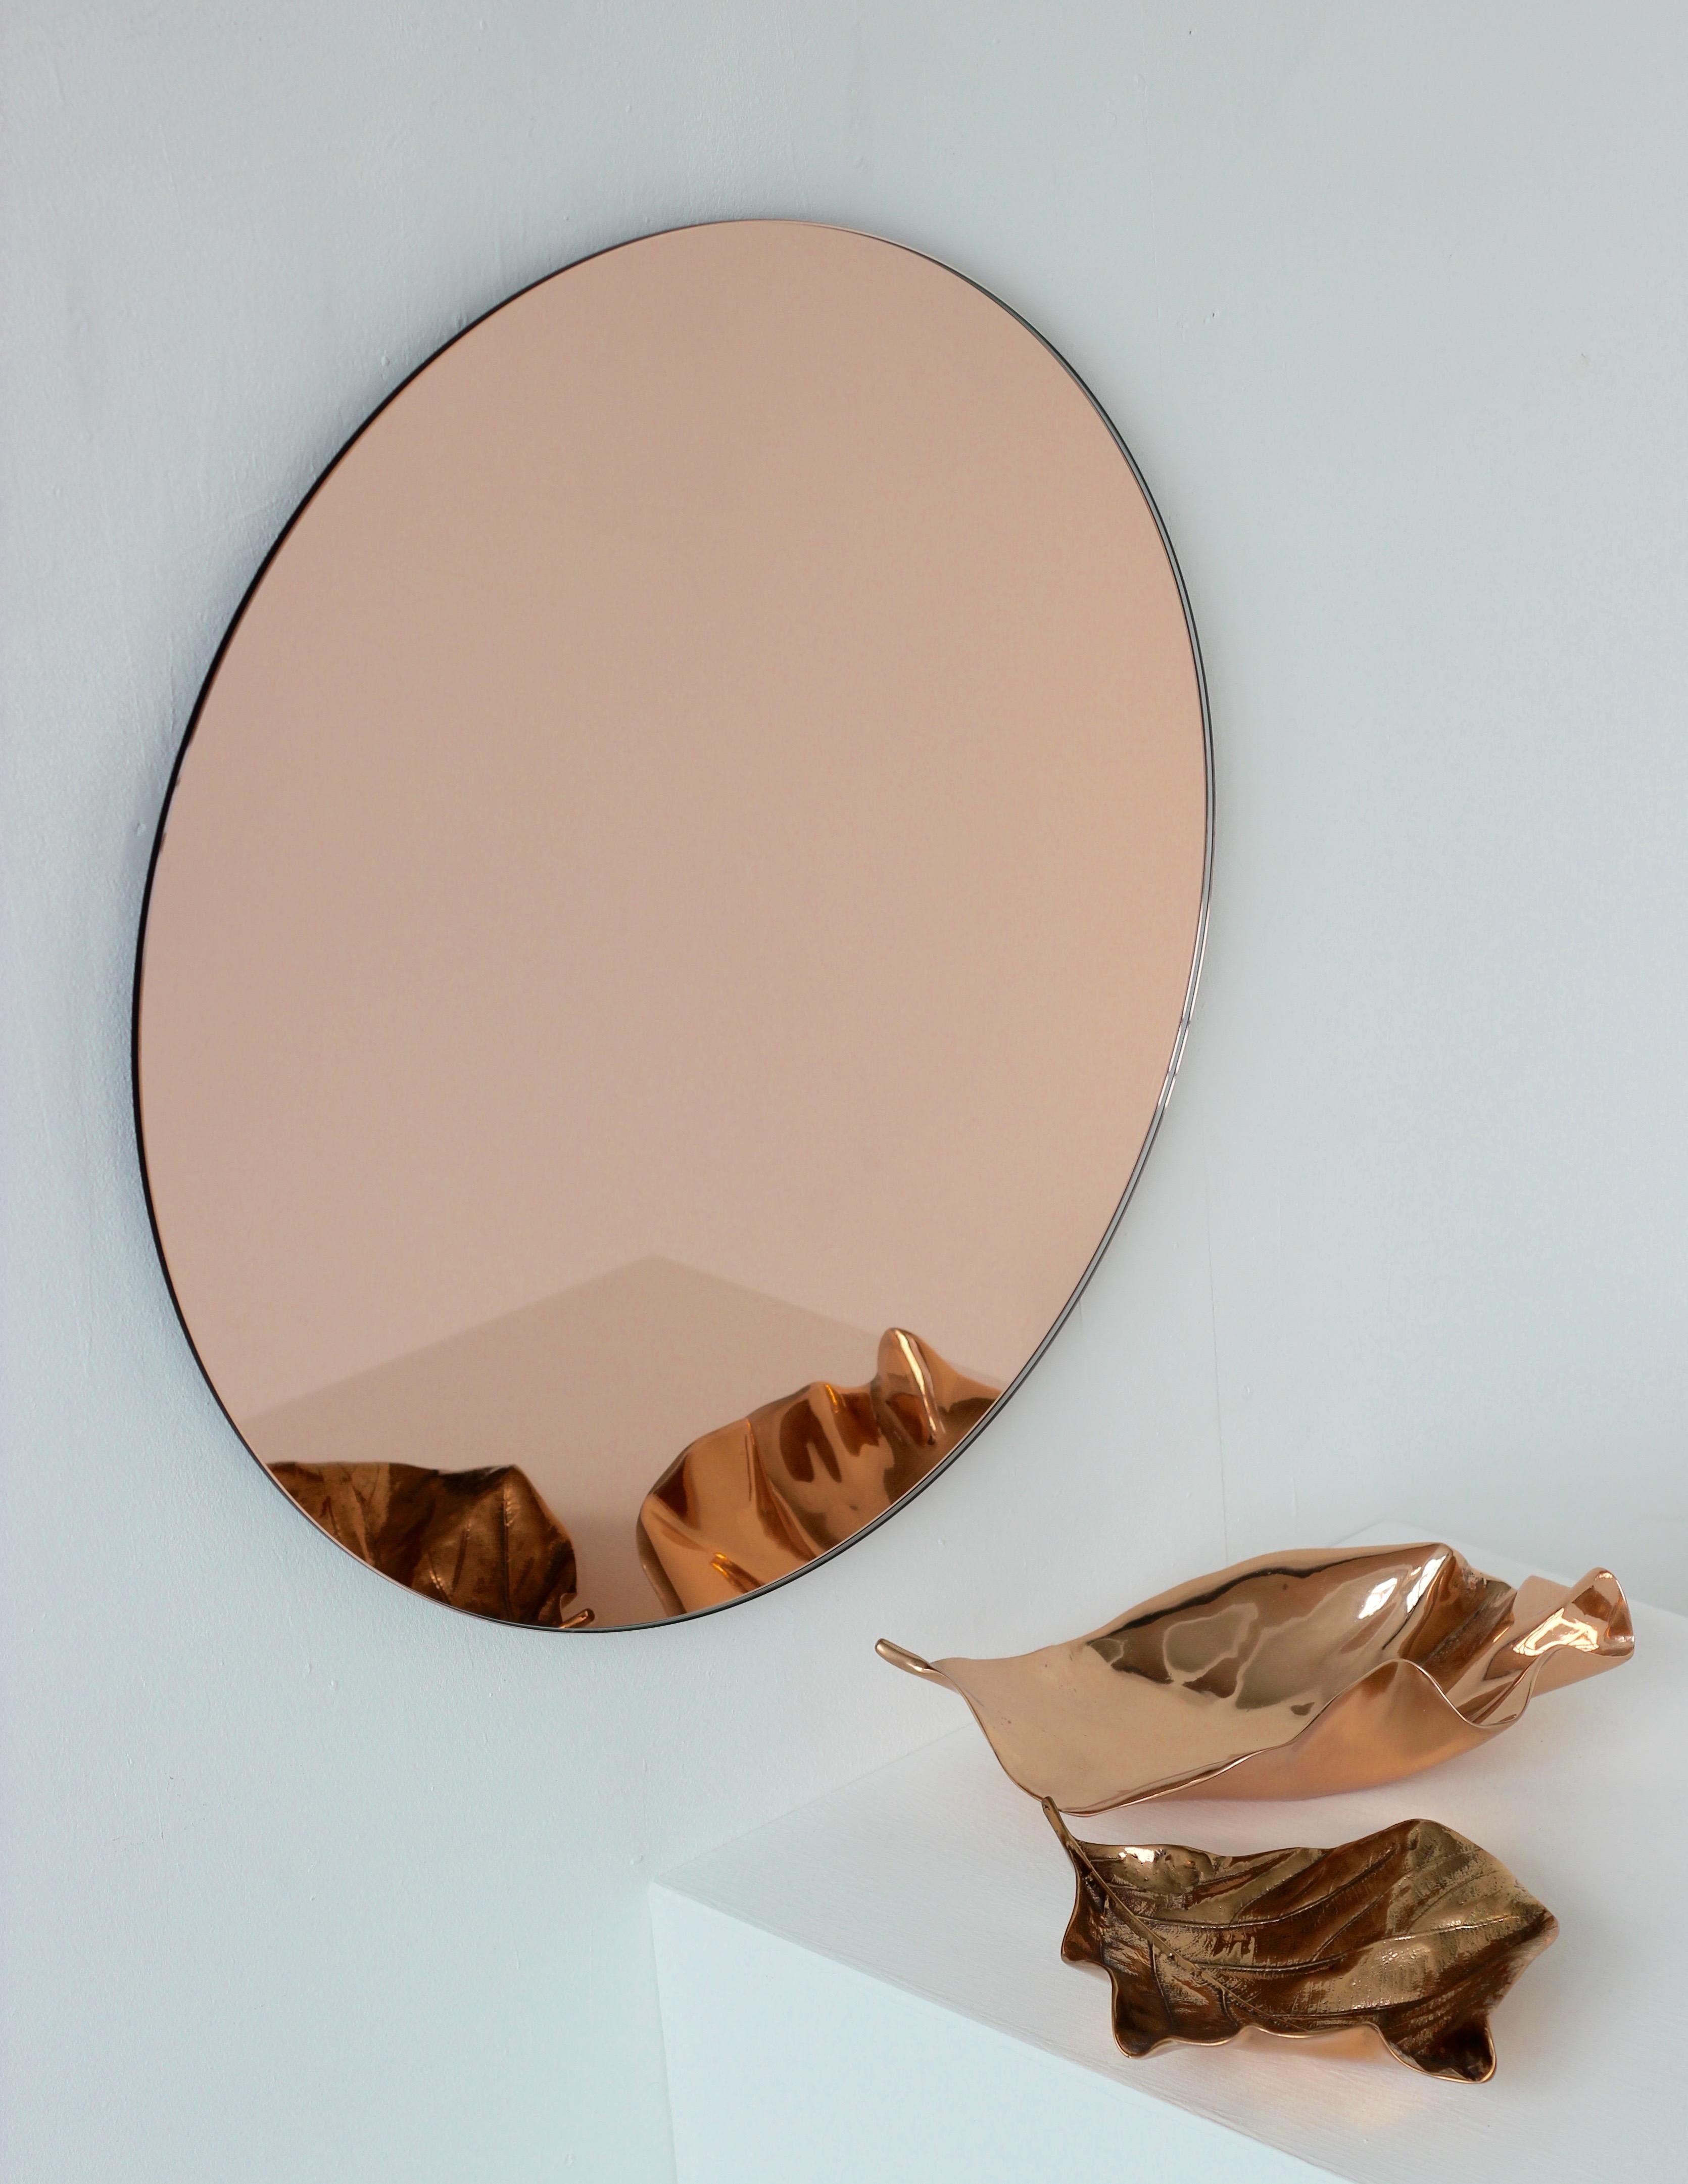 Organic Modern In Stock Orbis Rose / Peach Tinted Round Contemporary Frameless Mirror, Large For Sale